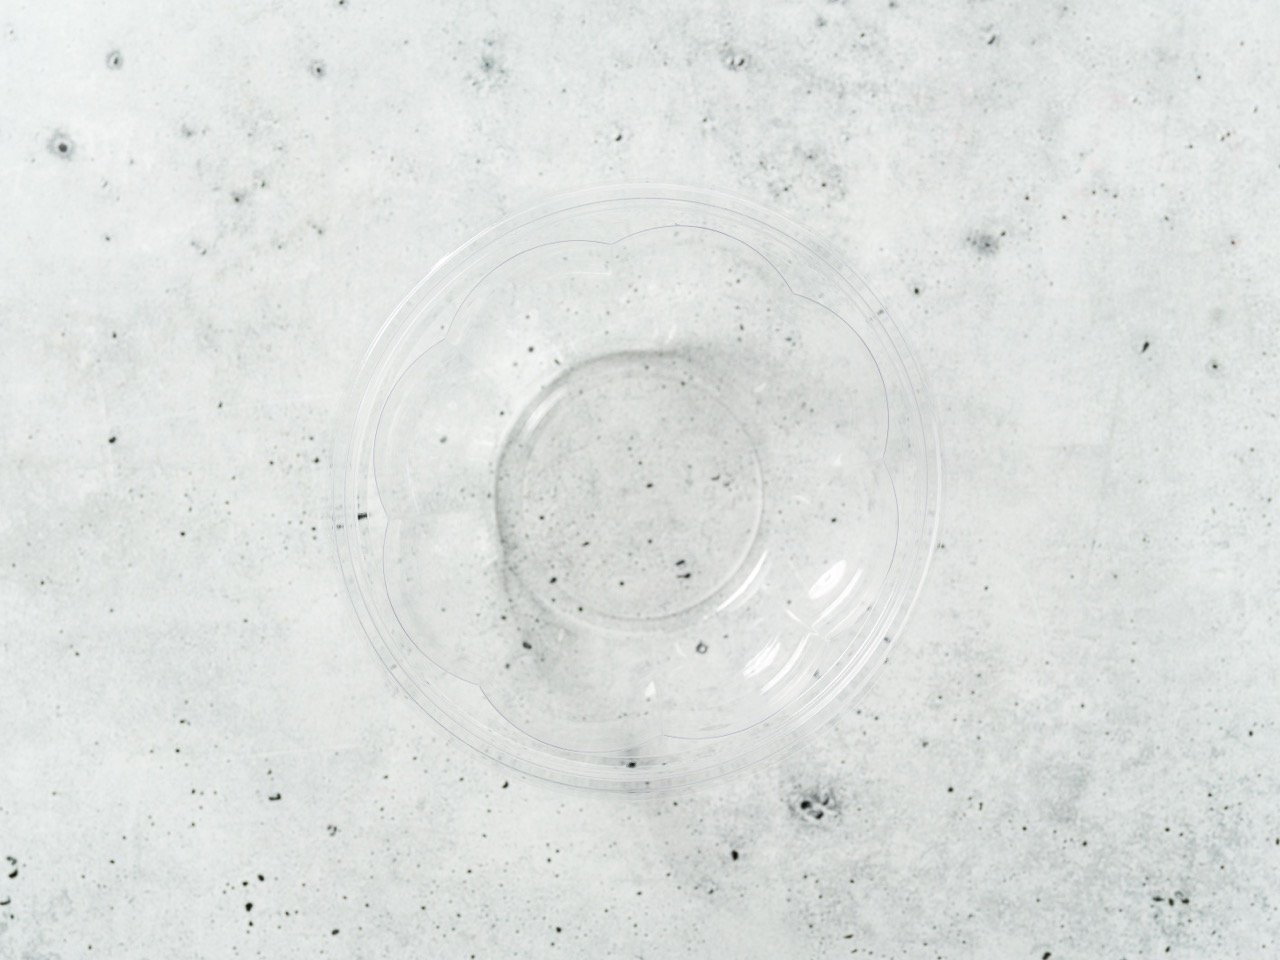  An empty clear glass bowl on a speckled grey surface 